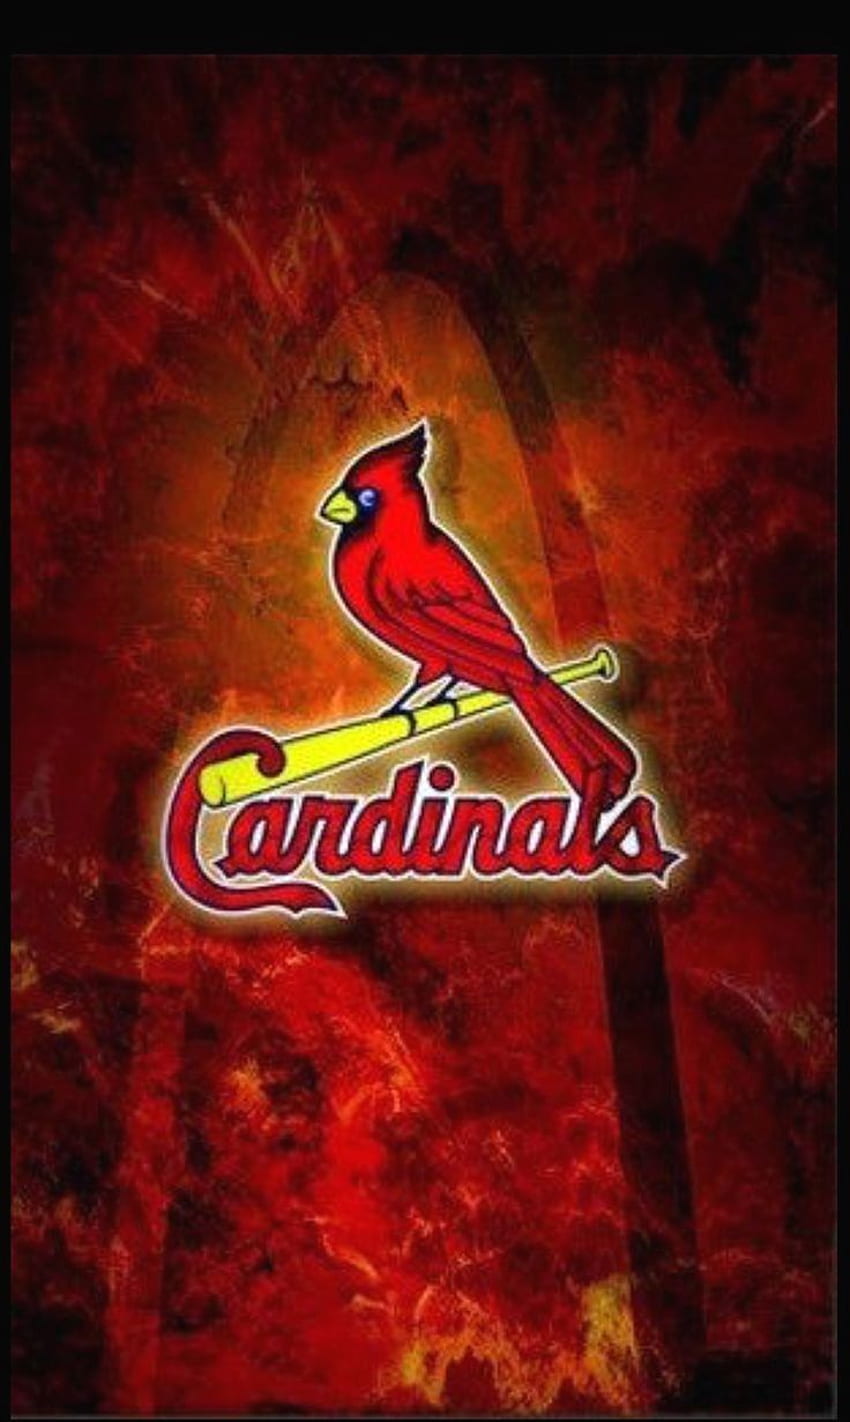 St louis Cardinals wallpaper by Pitin2017  Download on ZEDGE  ebe3